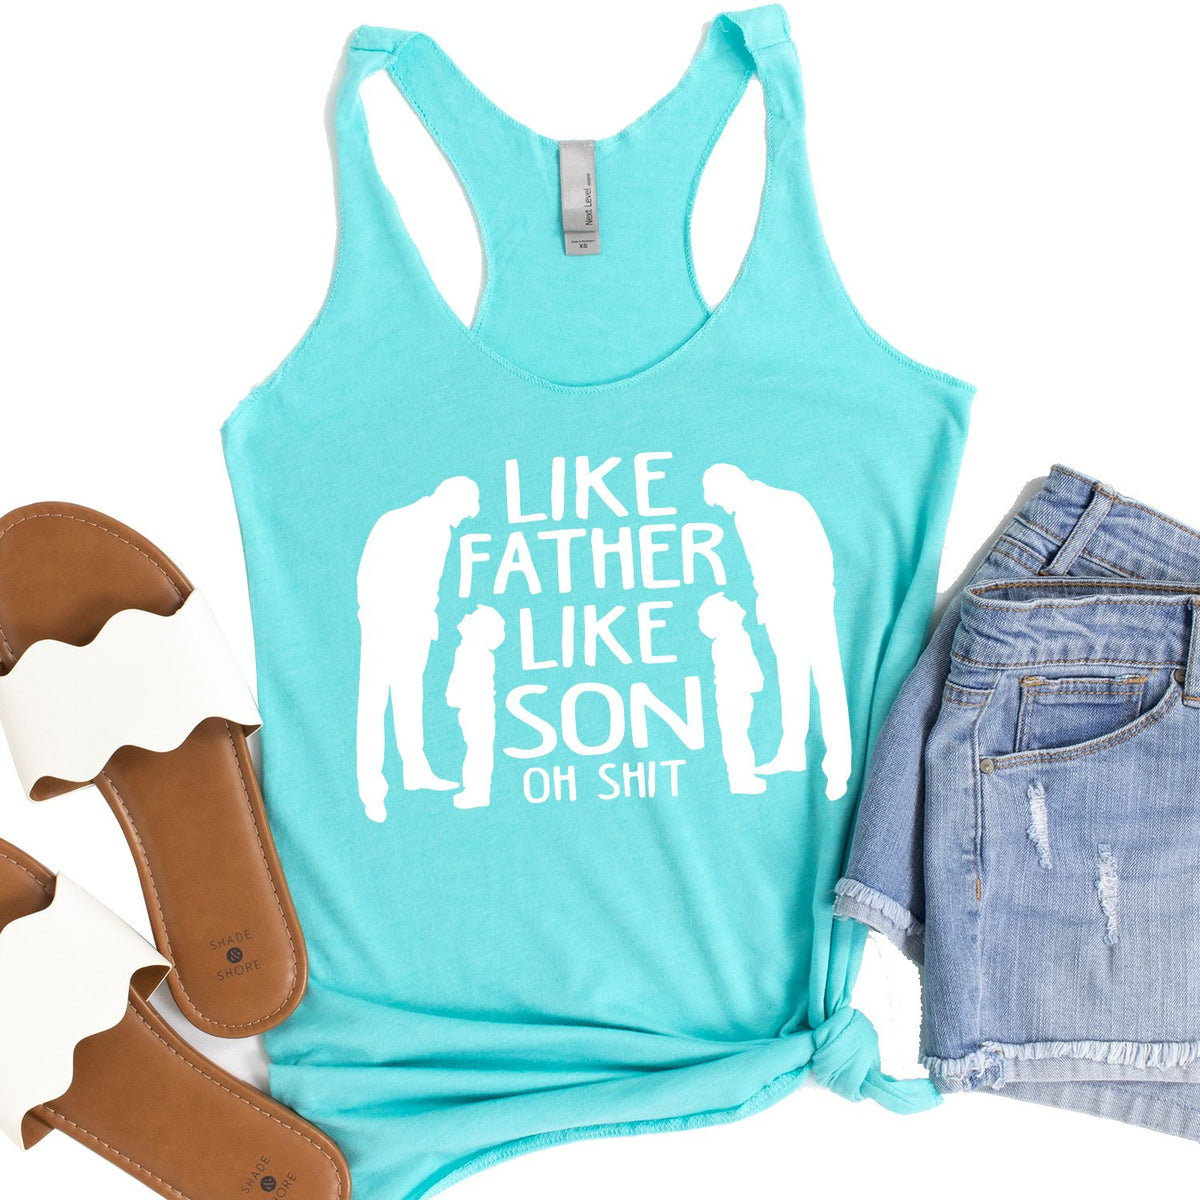 Like Father Like Son Oh Shit - Tank Top Racerback